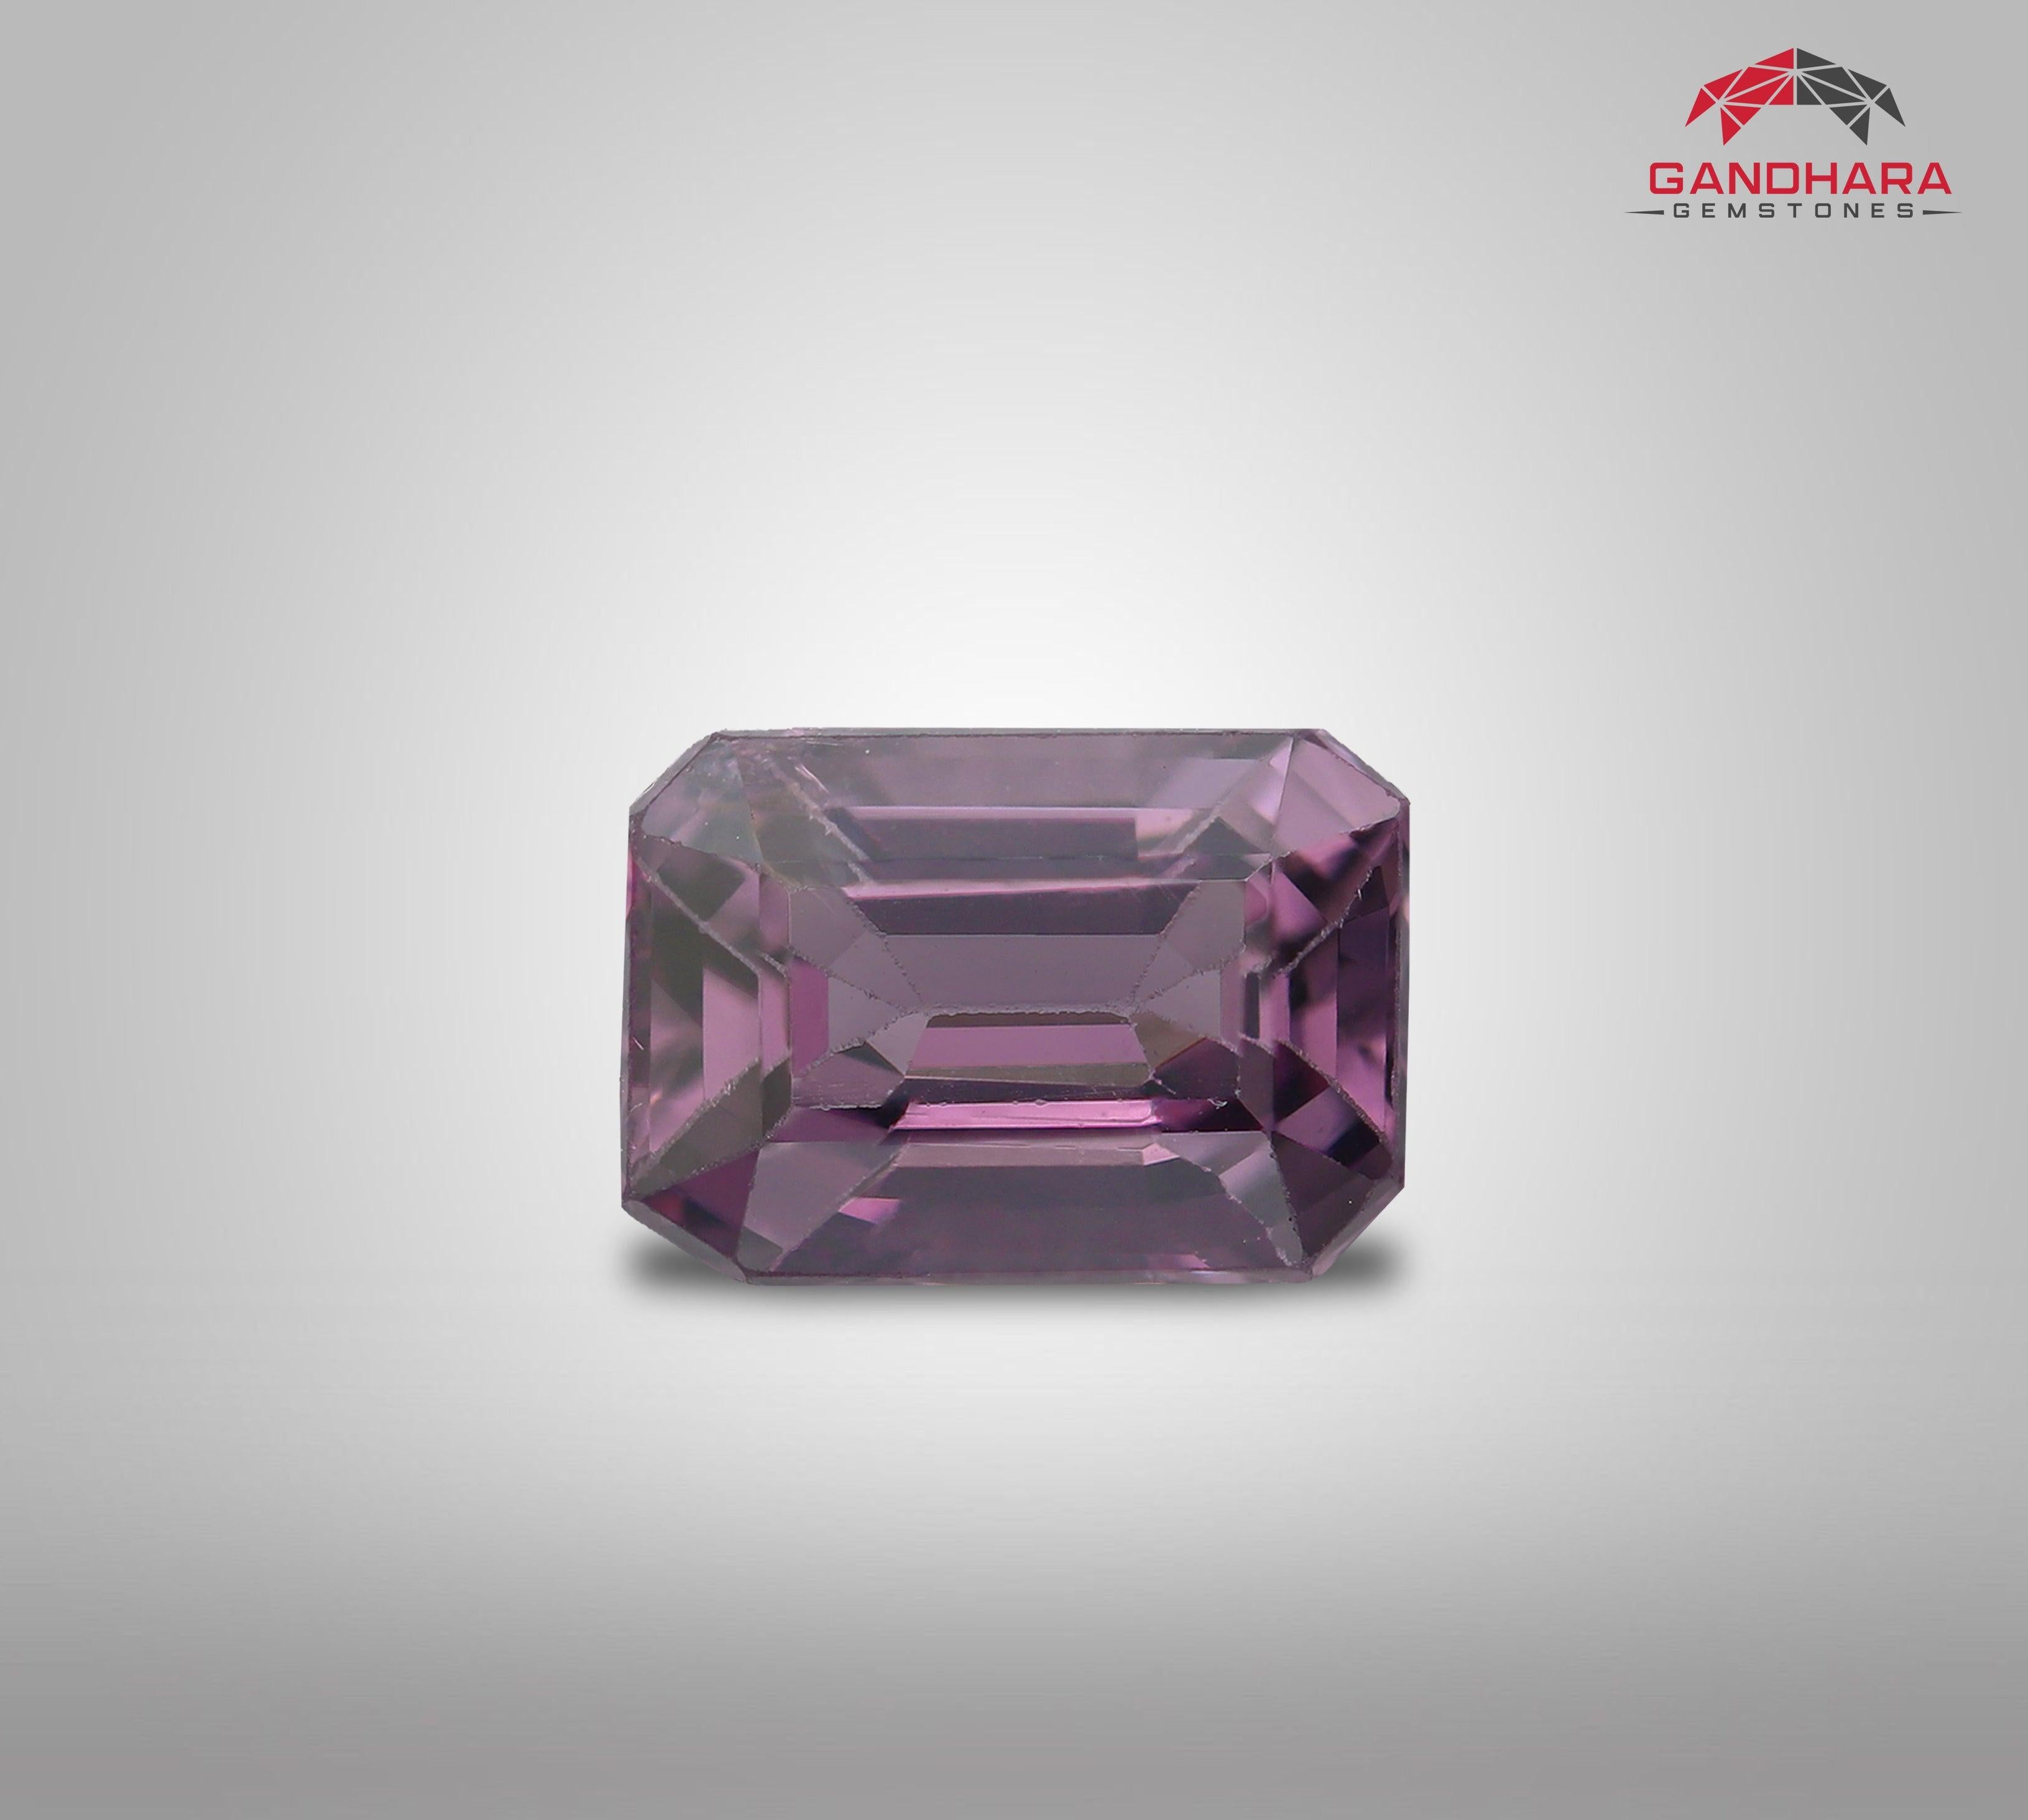 Interesting Loose Purple Spinel, available for sale at wholesale price, Emerald cut, Rectangular shape 1.50 carats loose certified spinel from Burma.

Product Information:
GEMSTONE TYPE	Interesting Loose Purple Spinel
WEIGHT	1.50